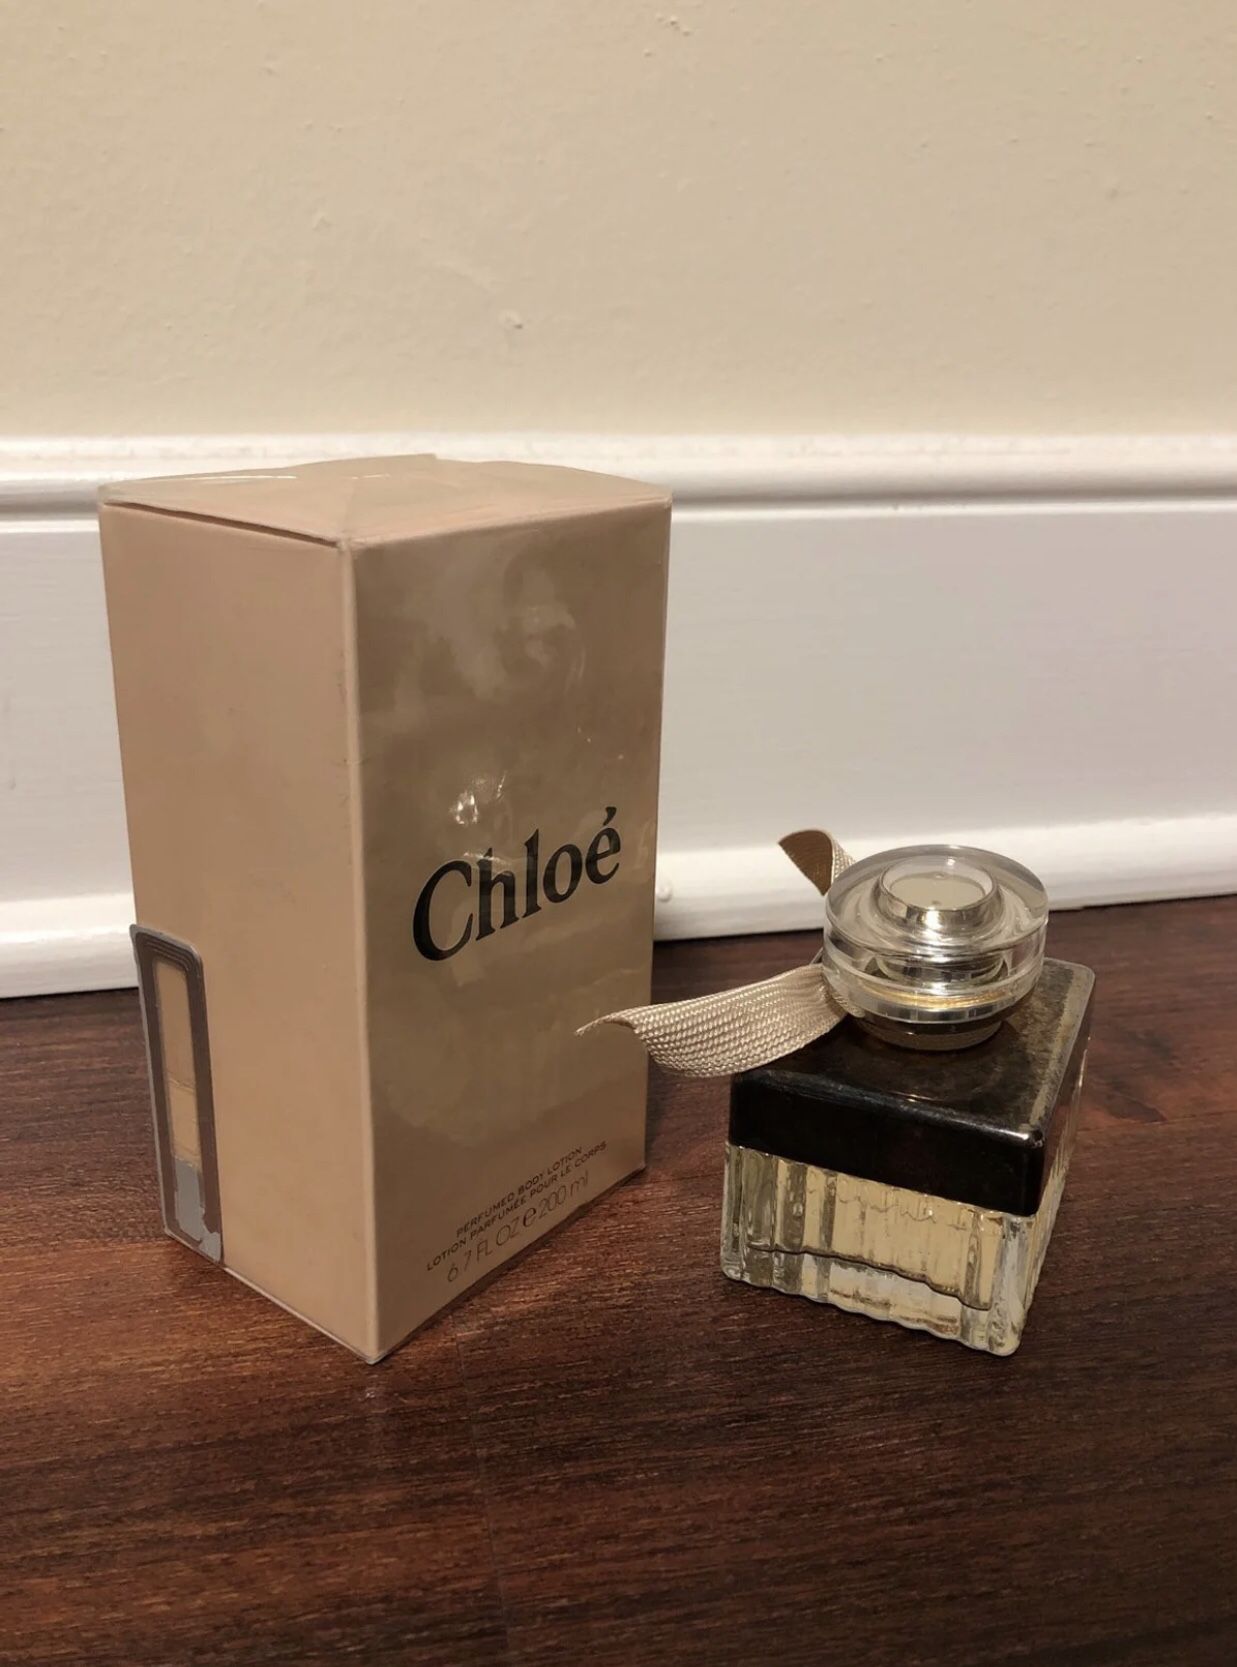 New Chloe body lotion and perfume both Retails together for $100.